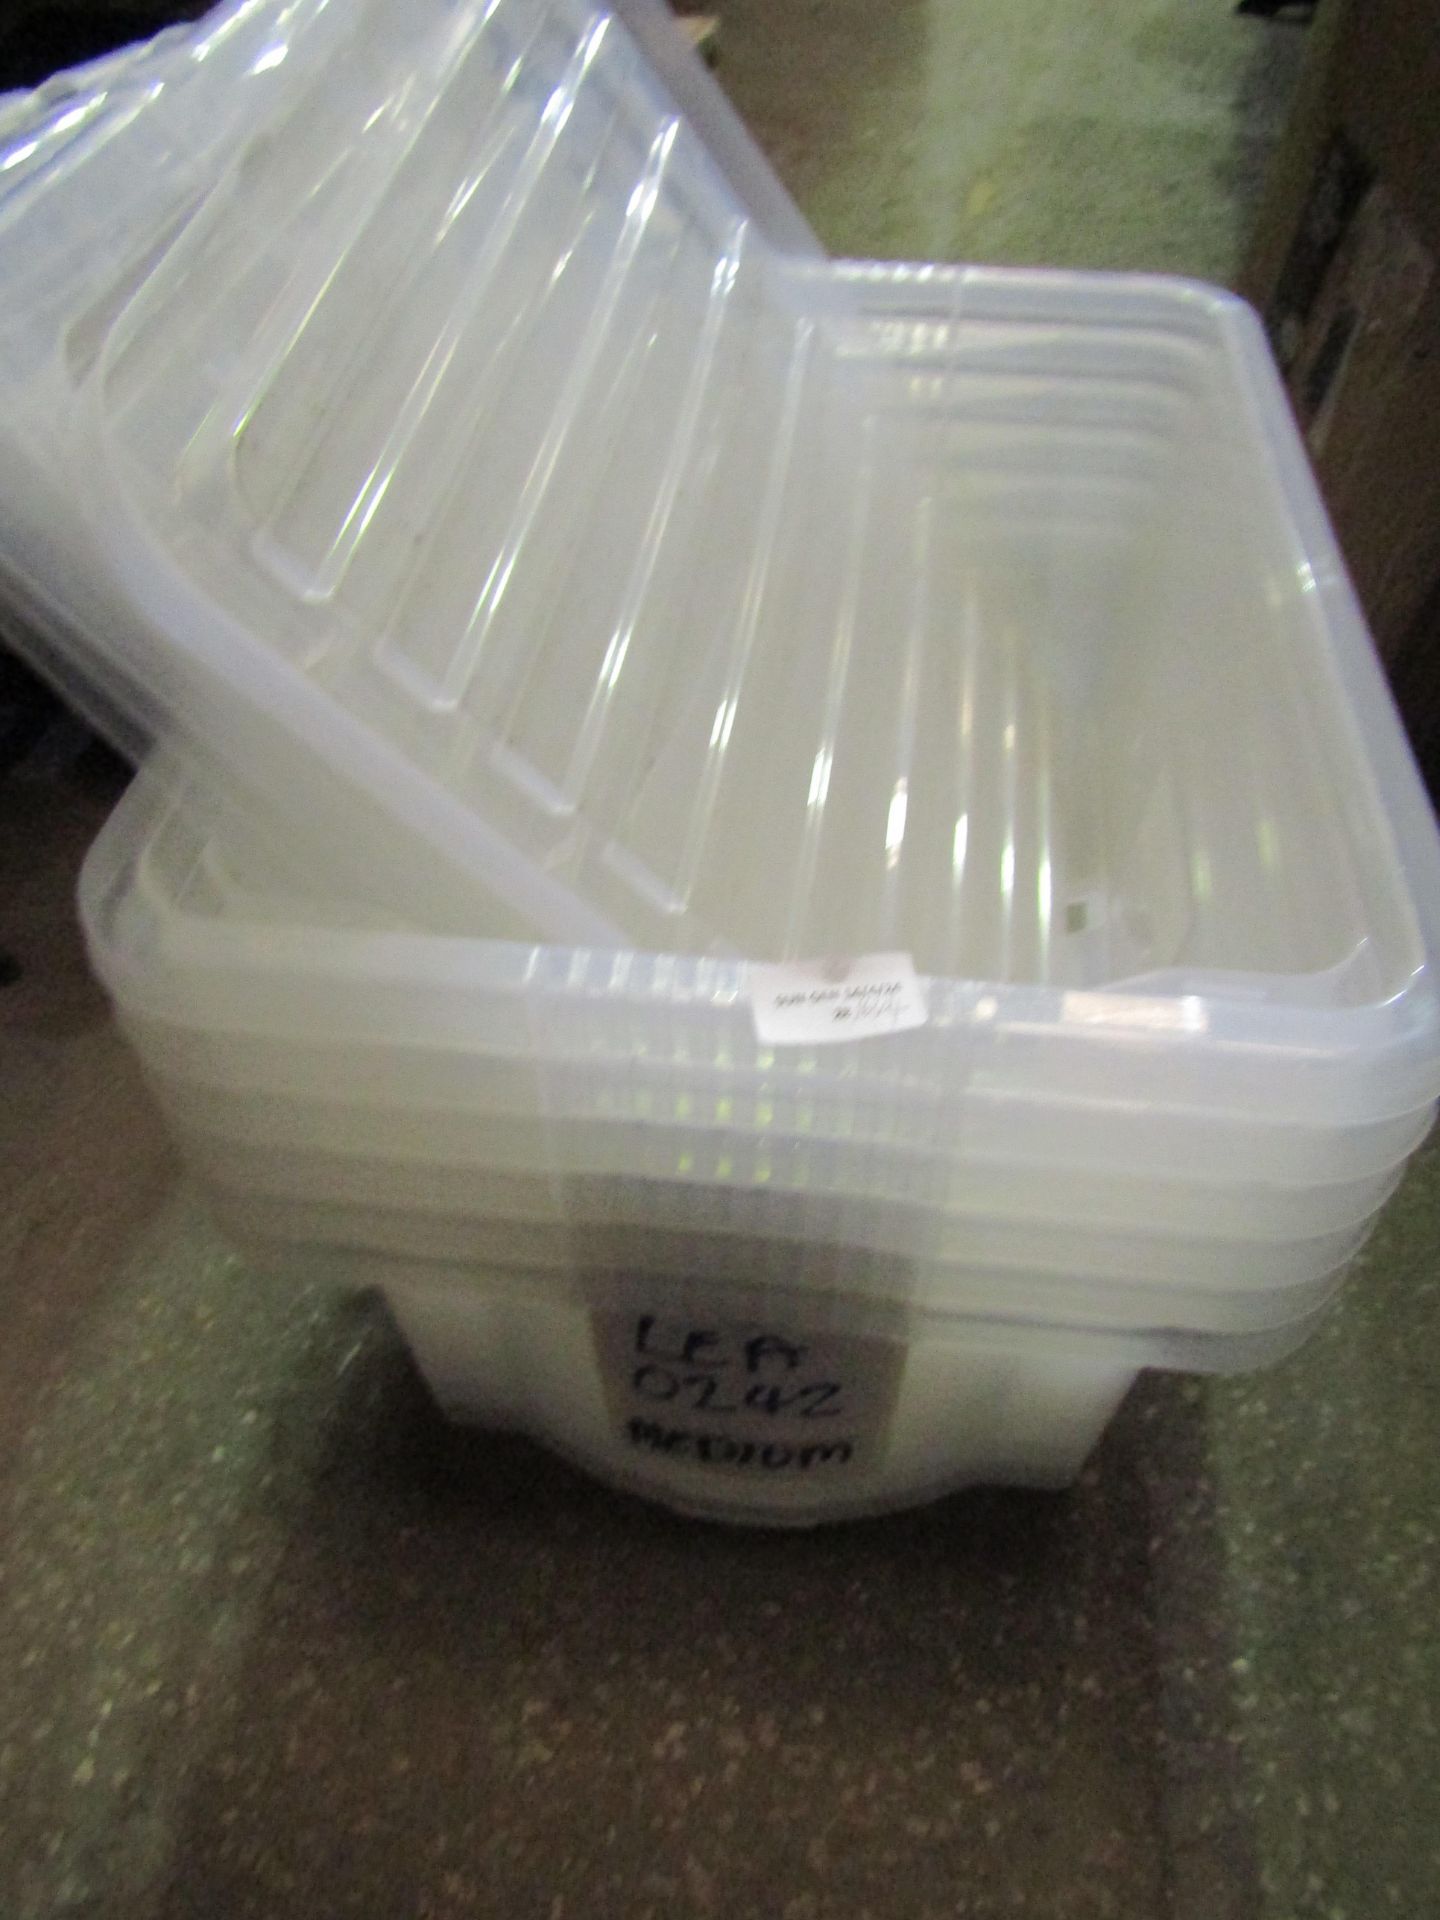 6x Crystal Clear Sorage Boxes With 4 Lids - Fairly Good Condition.